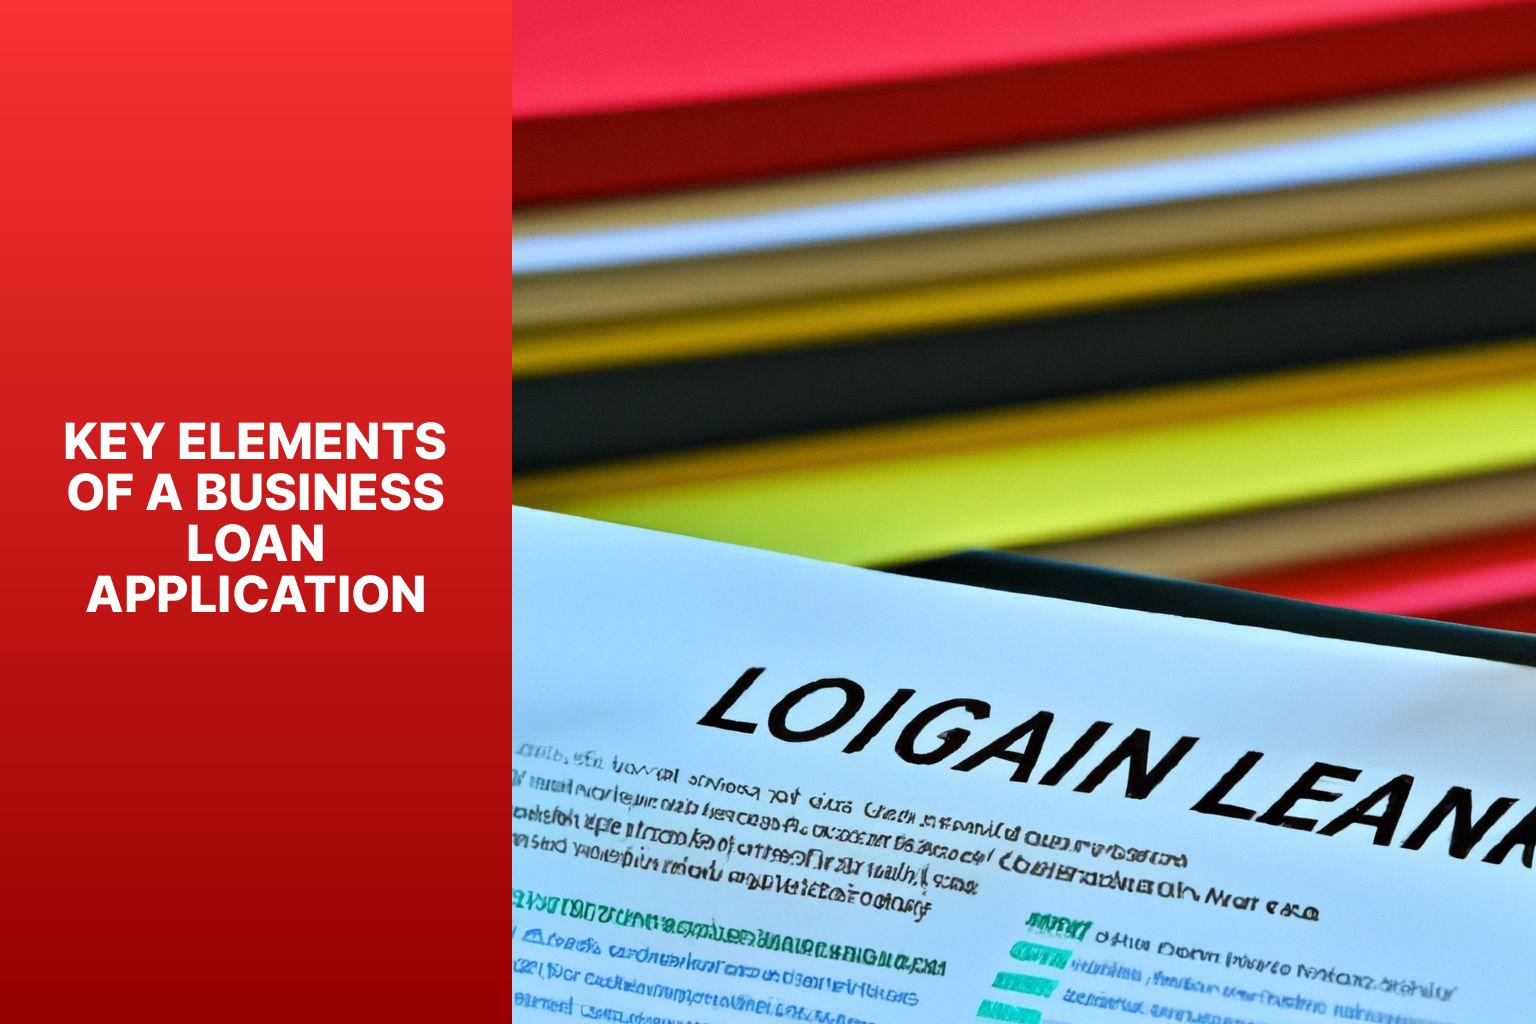 Key Elements of a Business Loan Application - Application Anatomy: Knowing Business Loan Application Requirements 